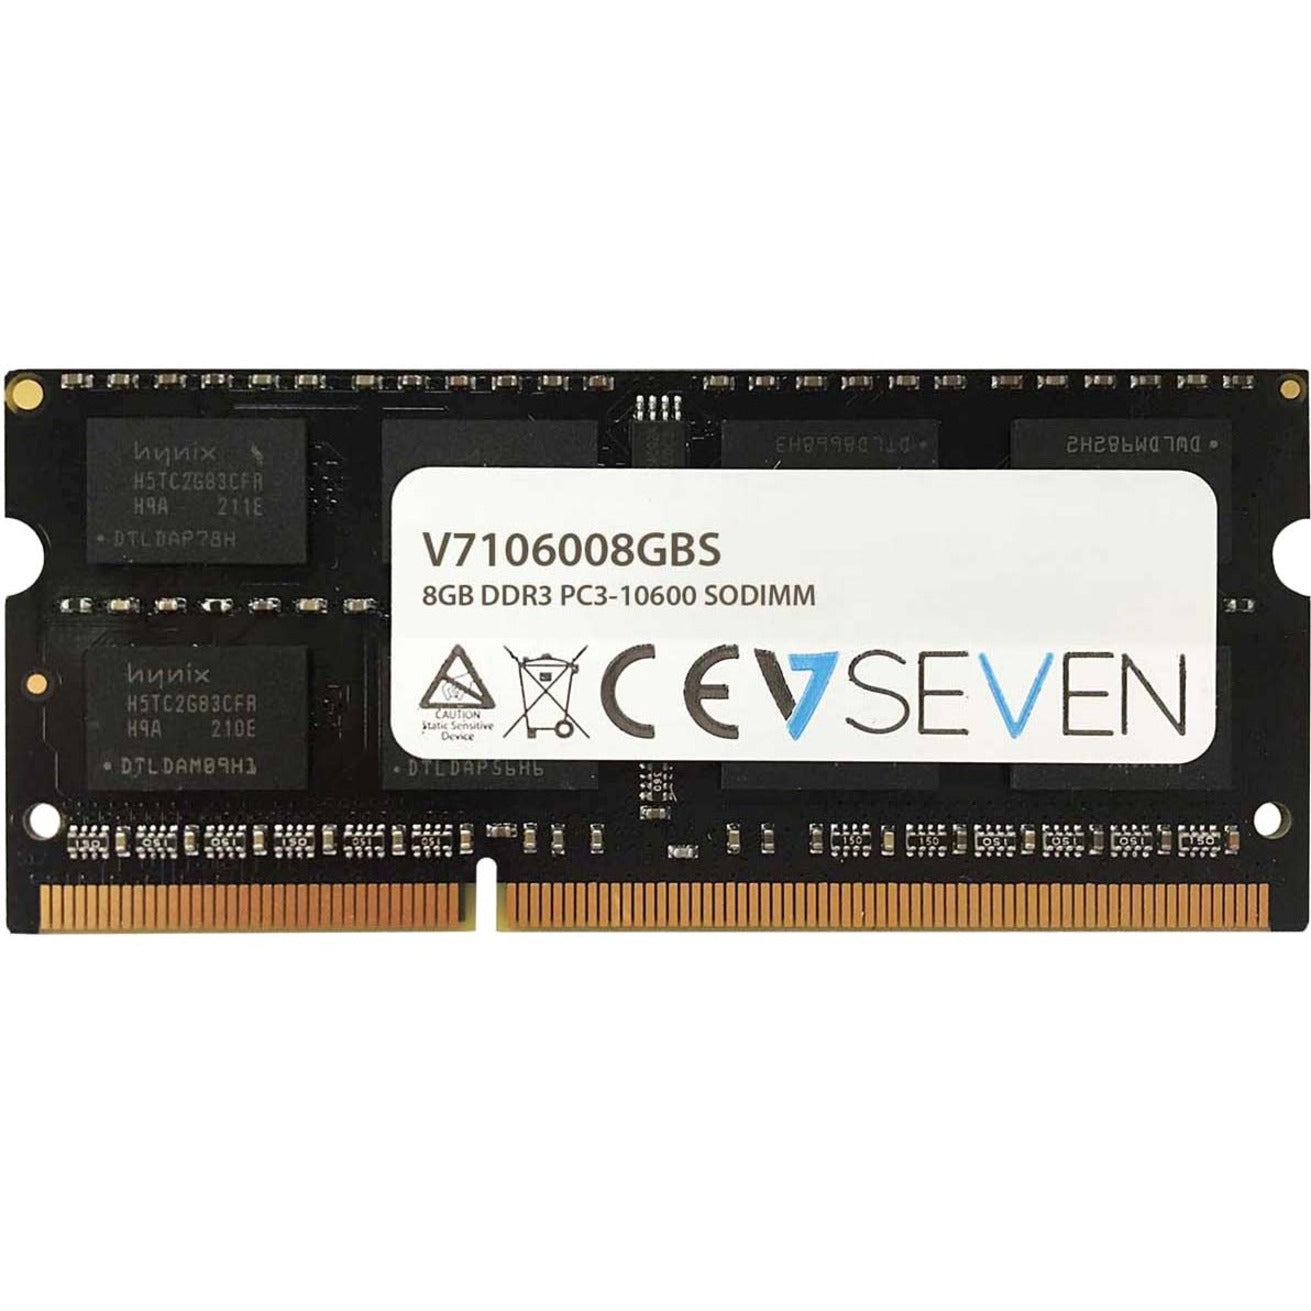 V7 V7106008GBS 8GB DDR3 PC3-10600 - 1333mhz SO DIMM Notebook Memory Module, Upgrade Your Laptop's Performance